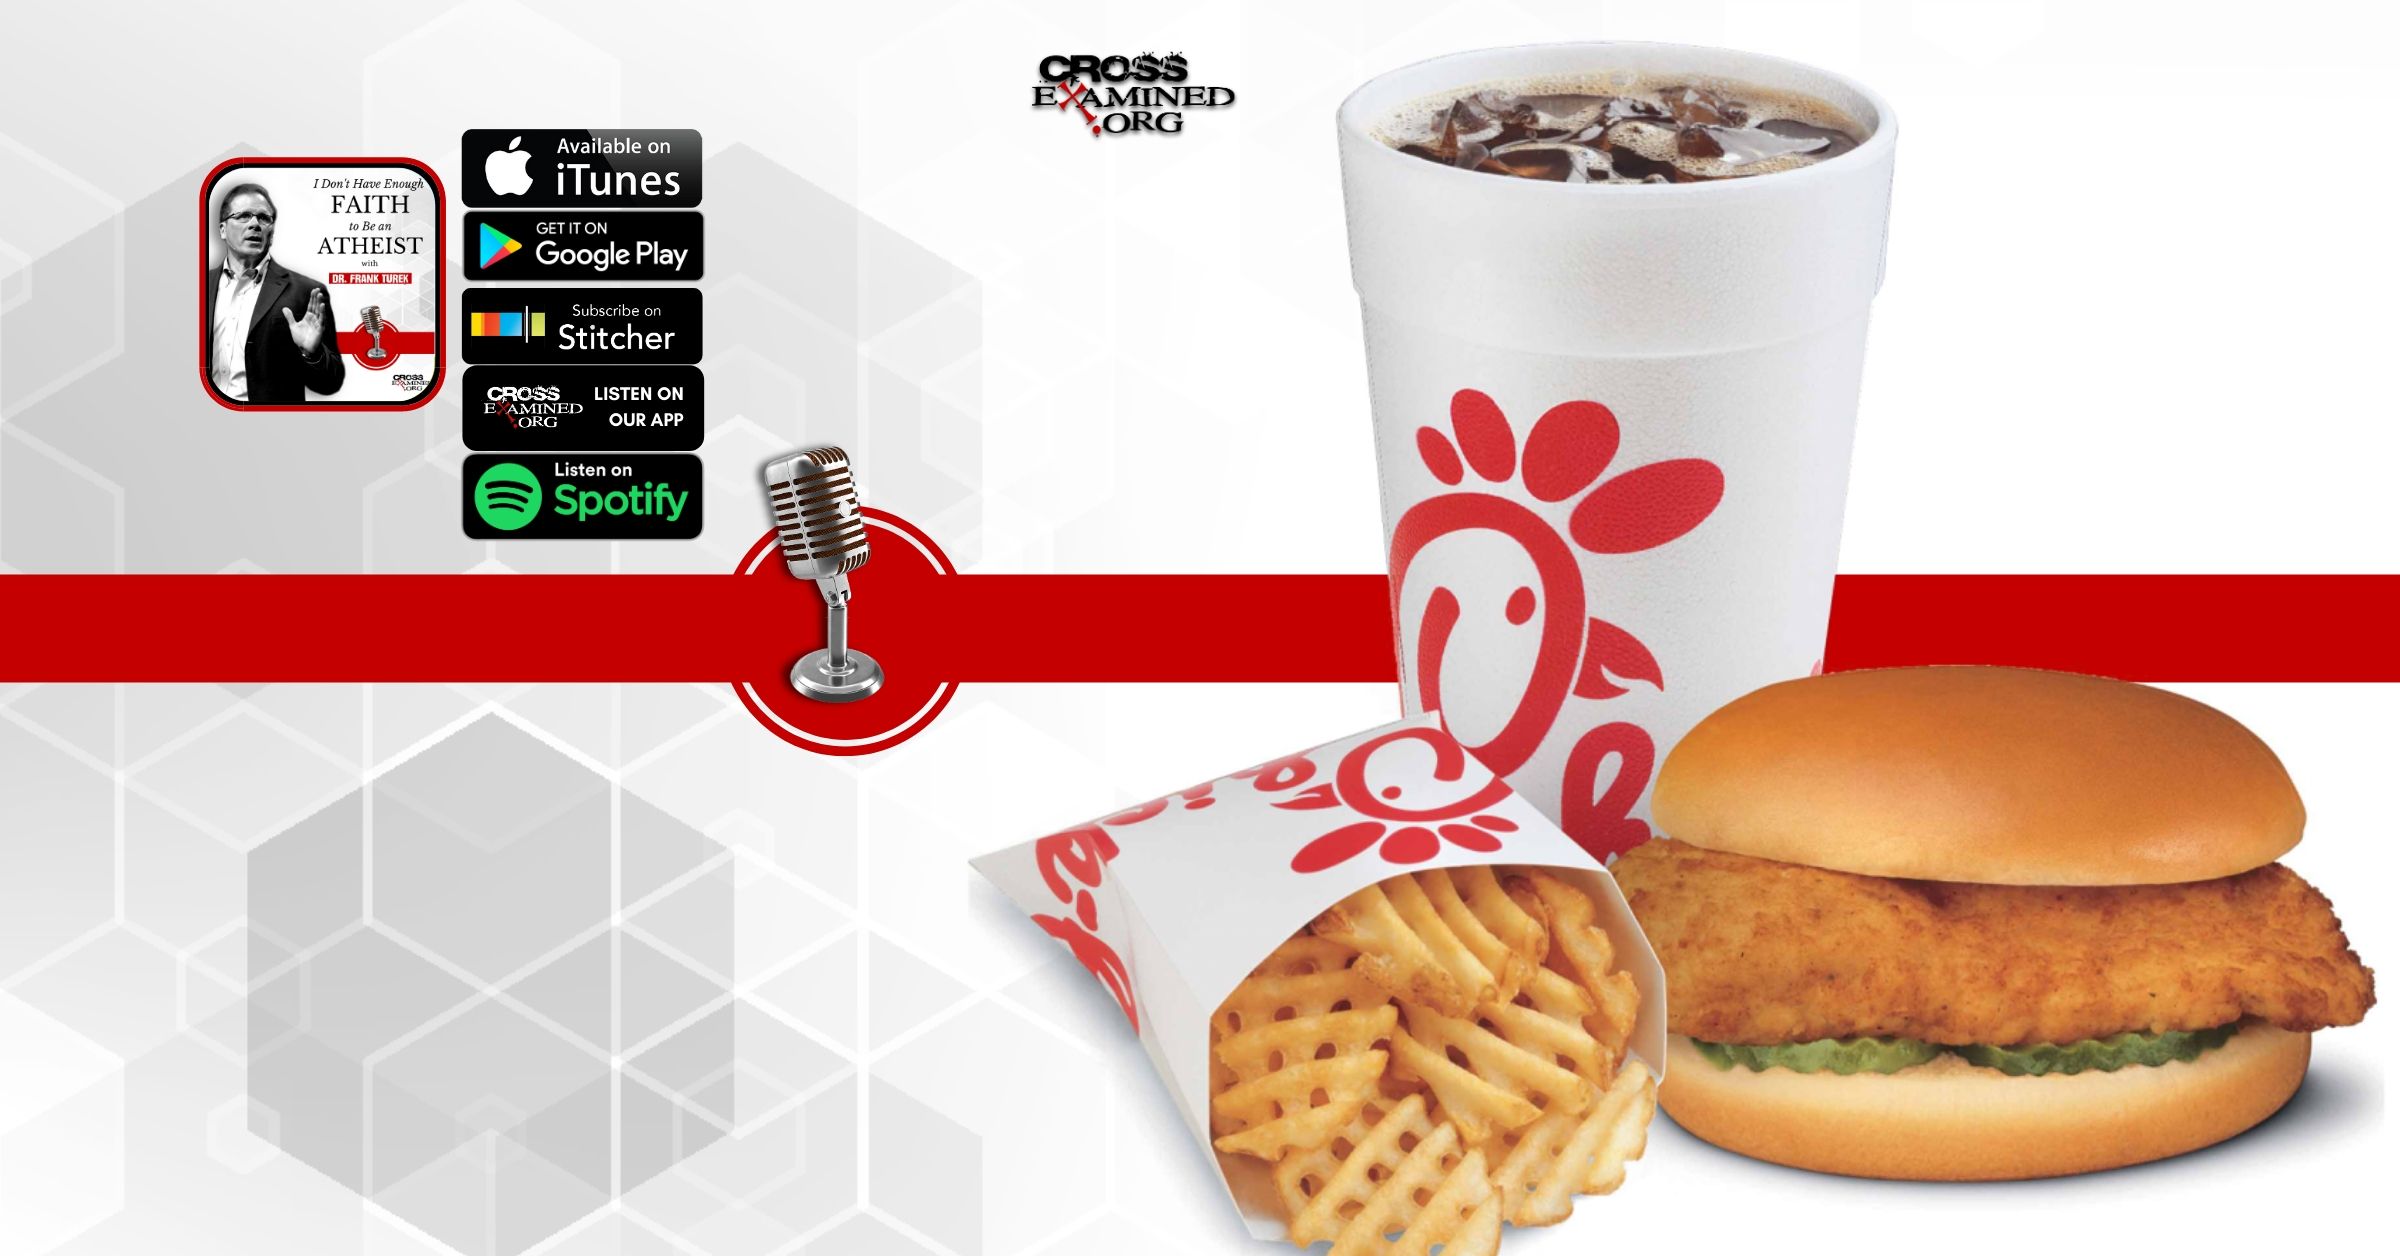 Is Chick-fil-A Chicken? And your questions